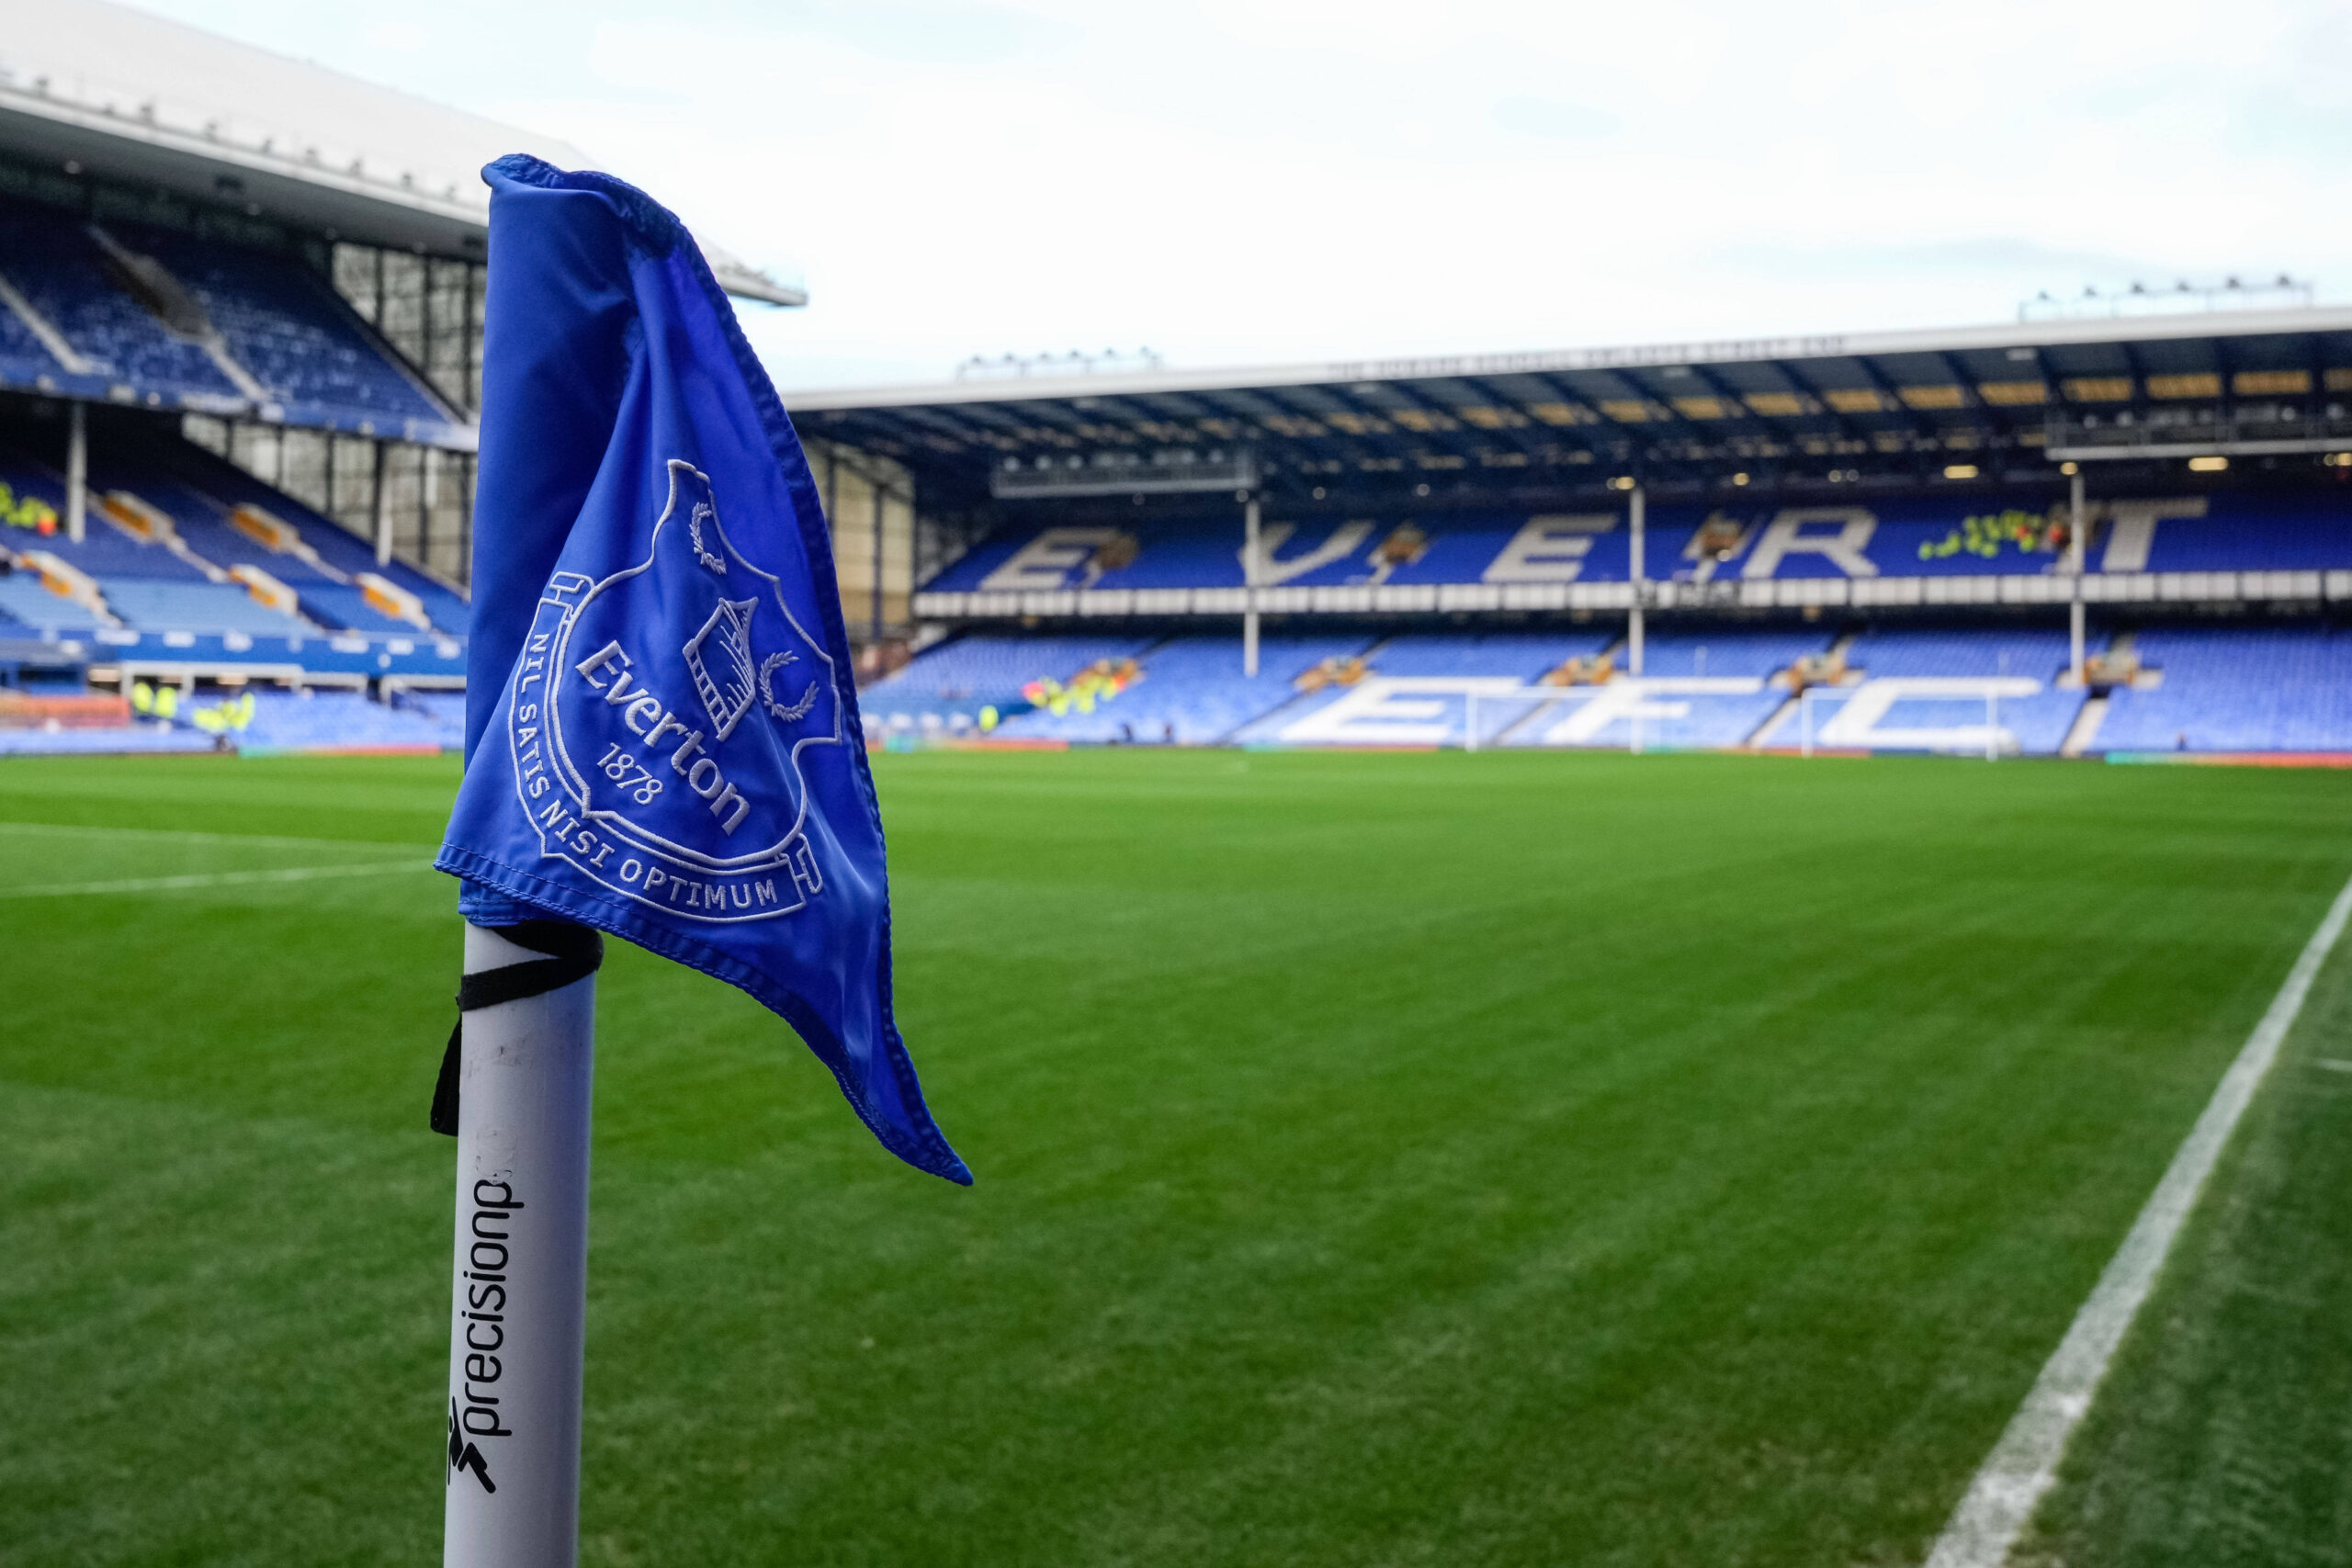 Image of the corner flag at an empty Goodison Park